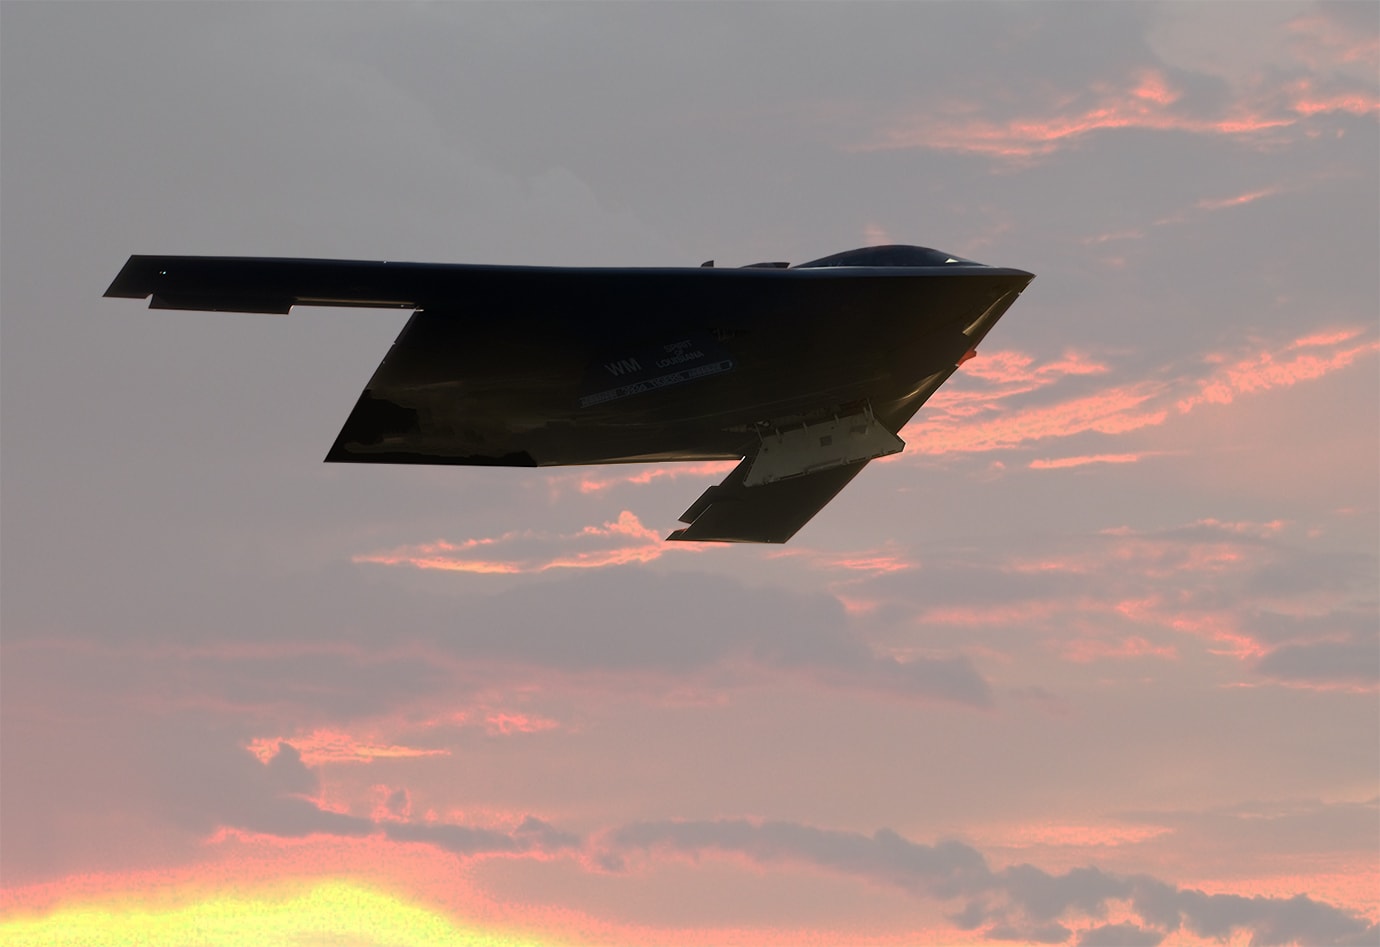 U.S. Air Force’s new B-21 bomber will likely have air-to-air defense